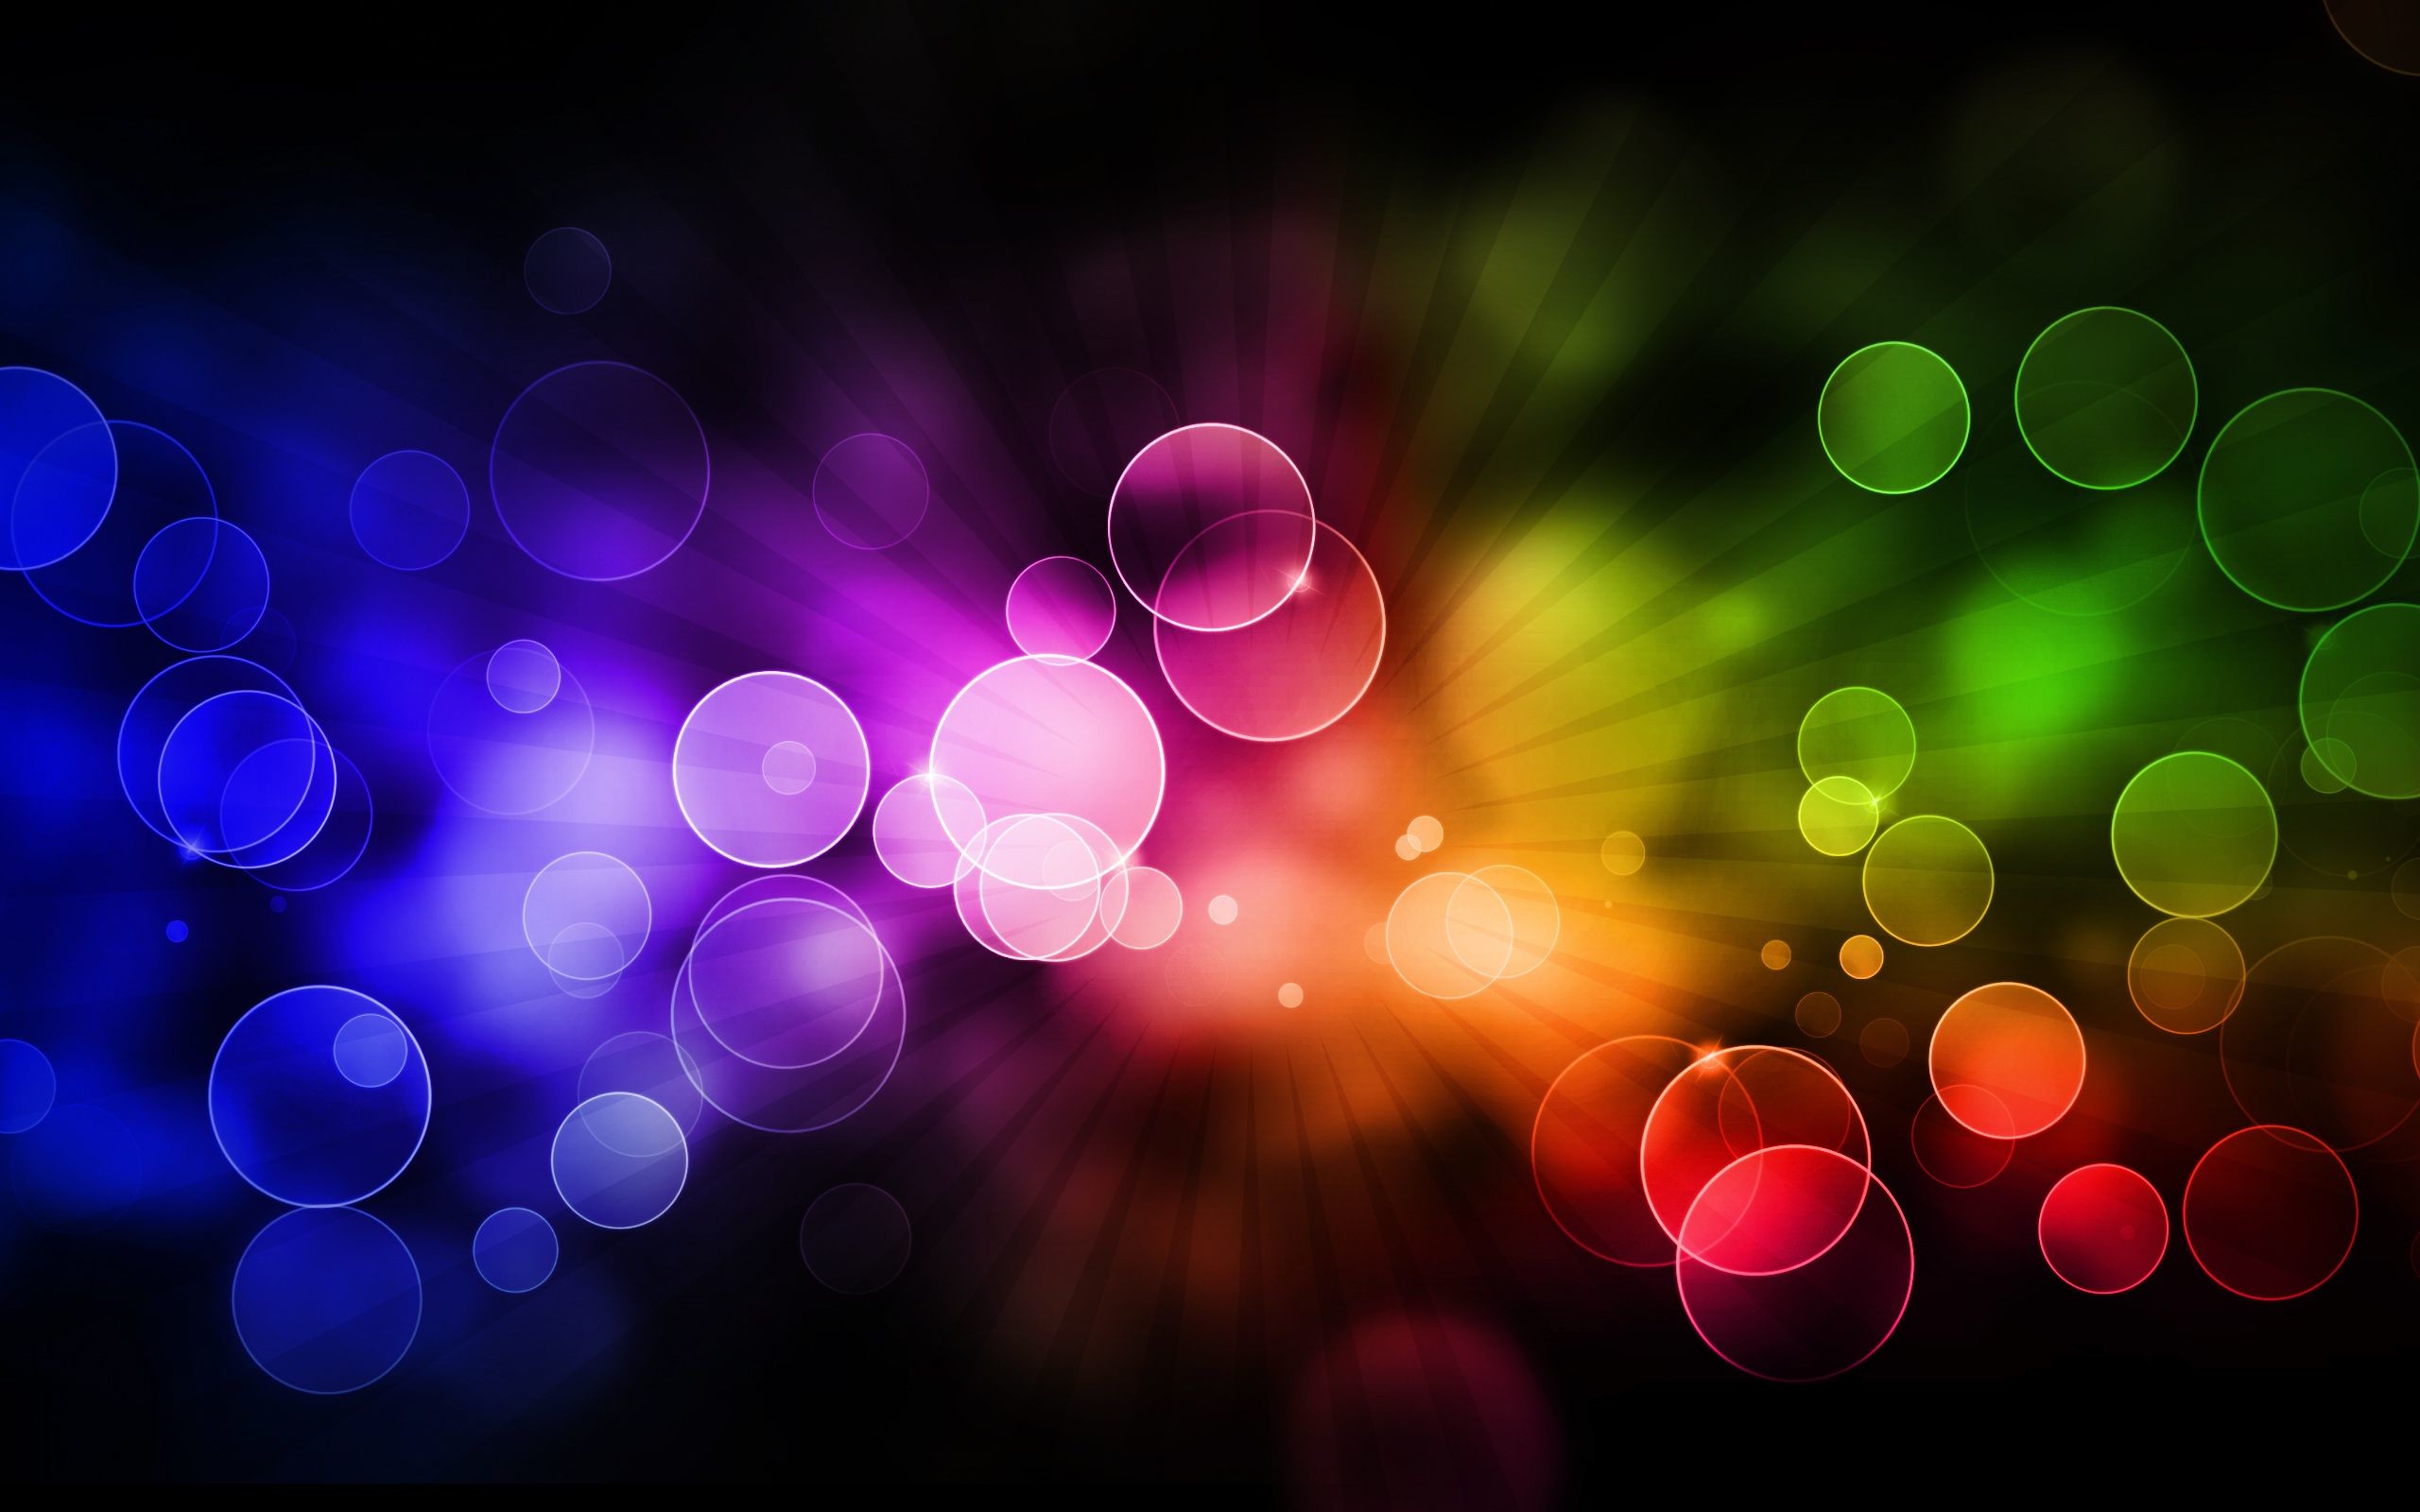 2560x1600 HD Wallpaper and background photos of Rainbow Colour Wallpaper for fans of  Colors images.